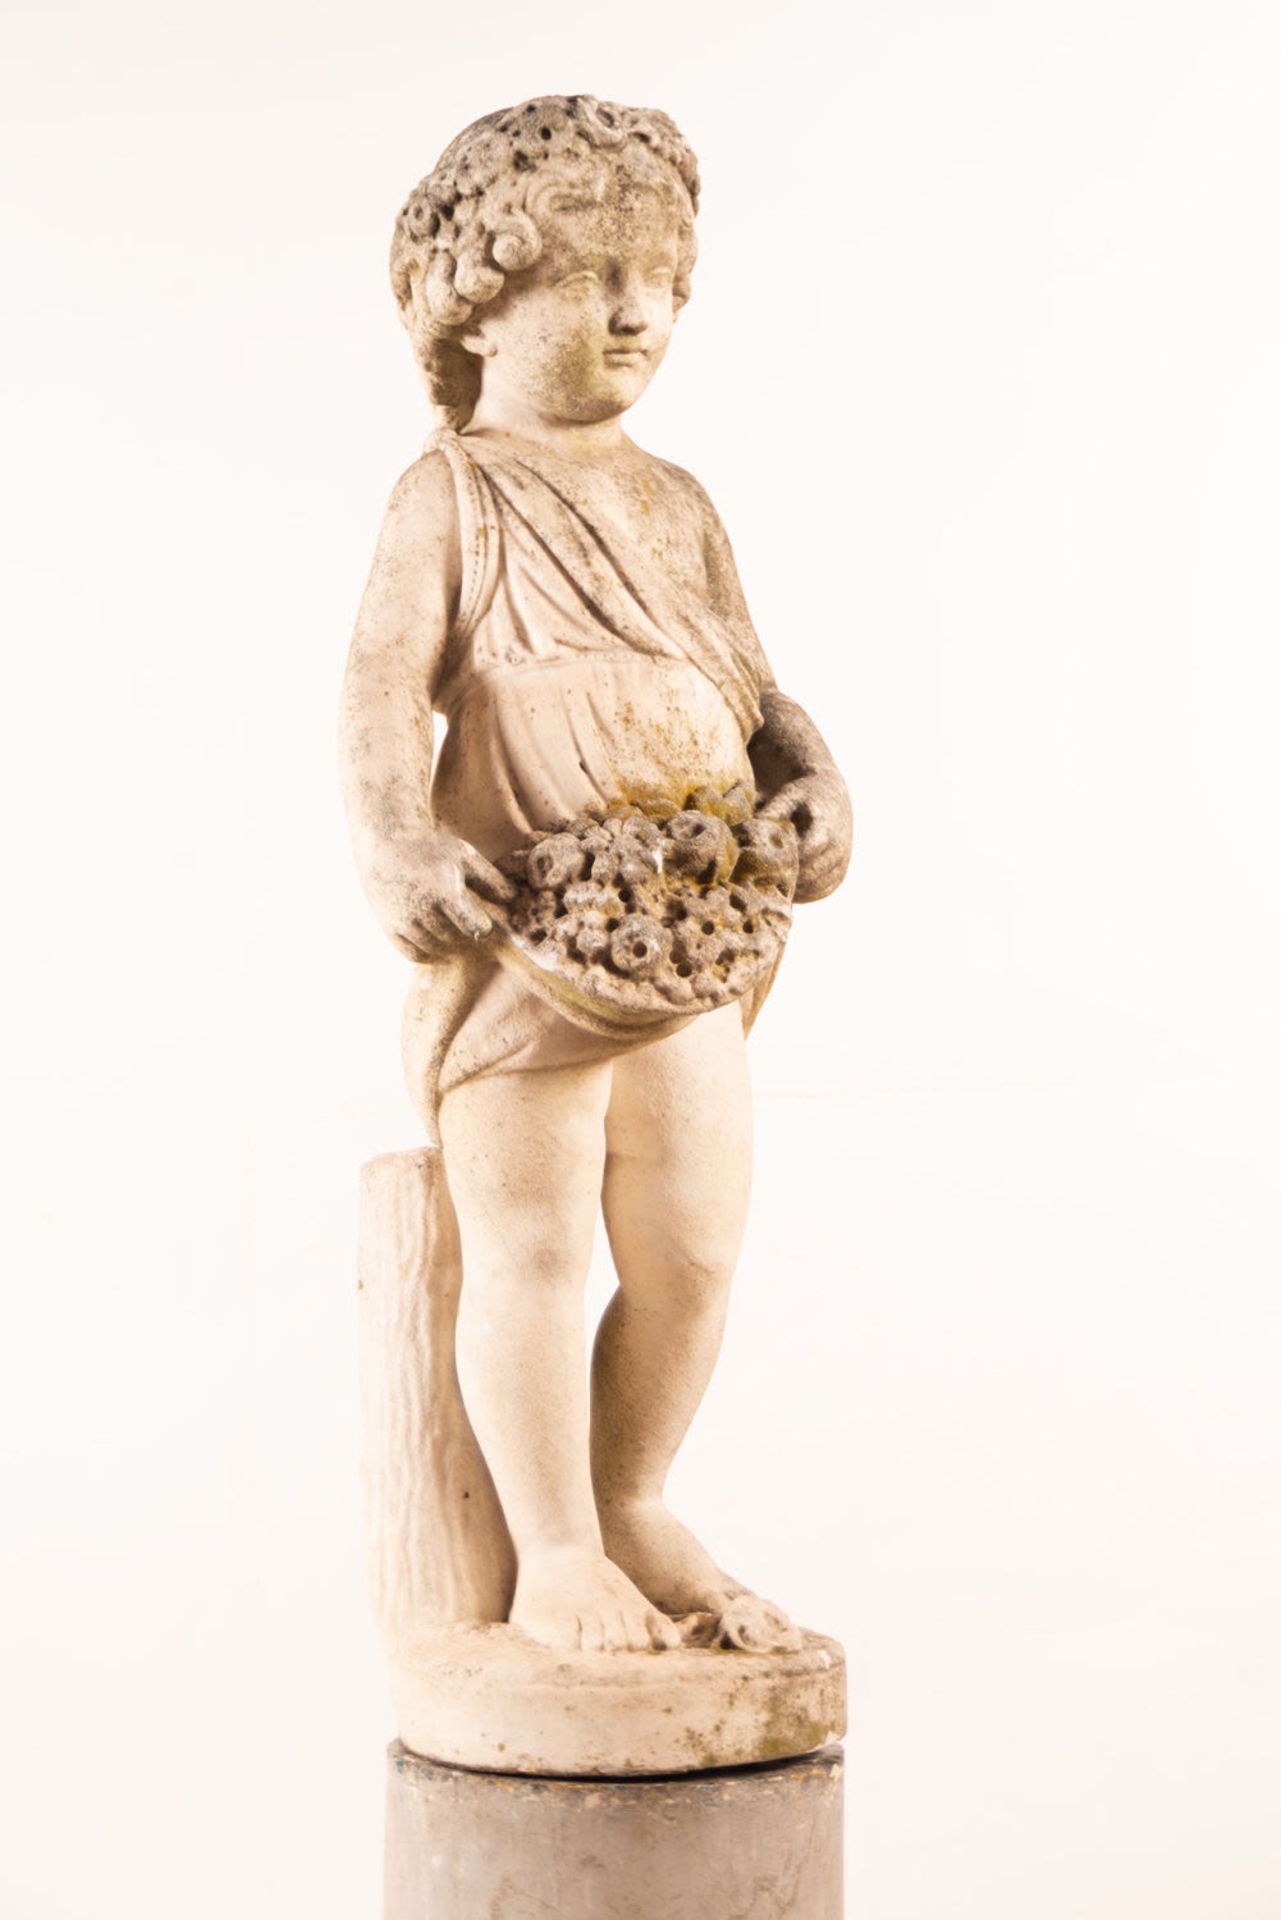 Large Cherub Figure in Marble, France, 18th century - Image 5 of 14